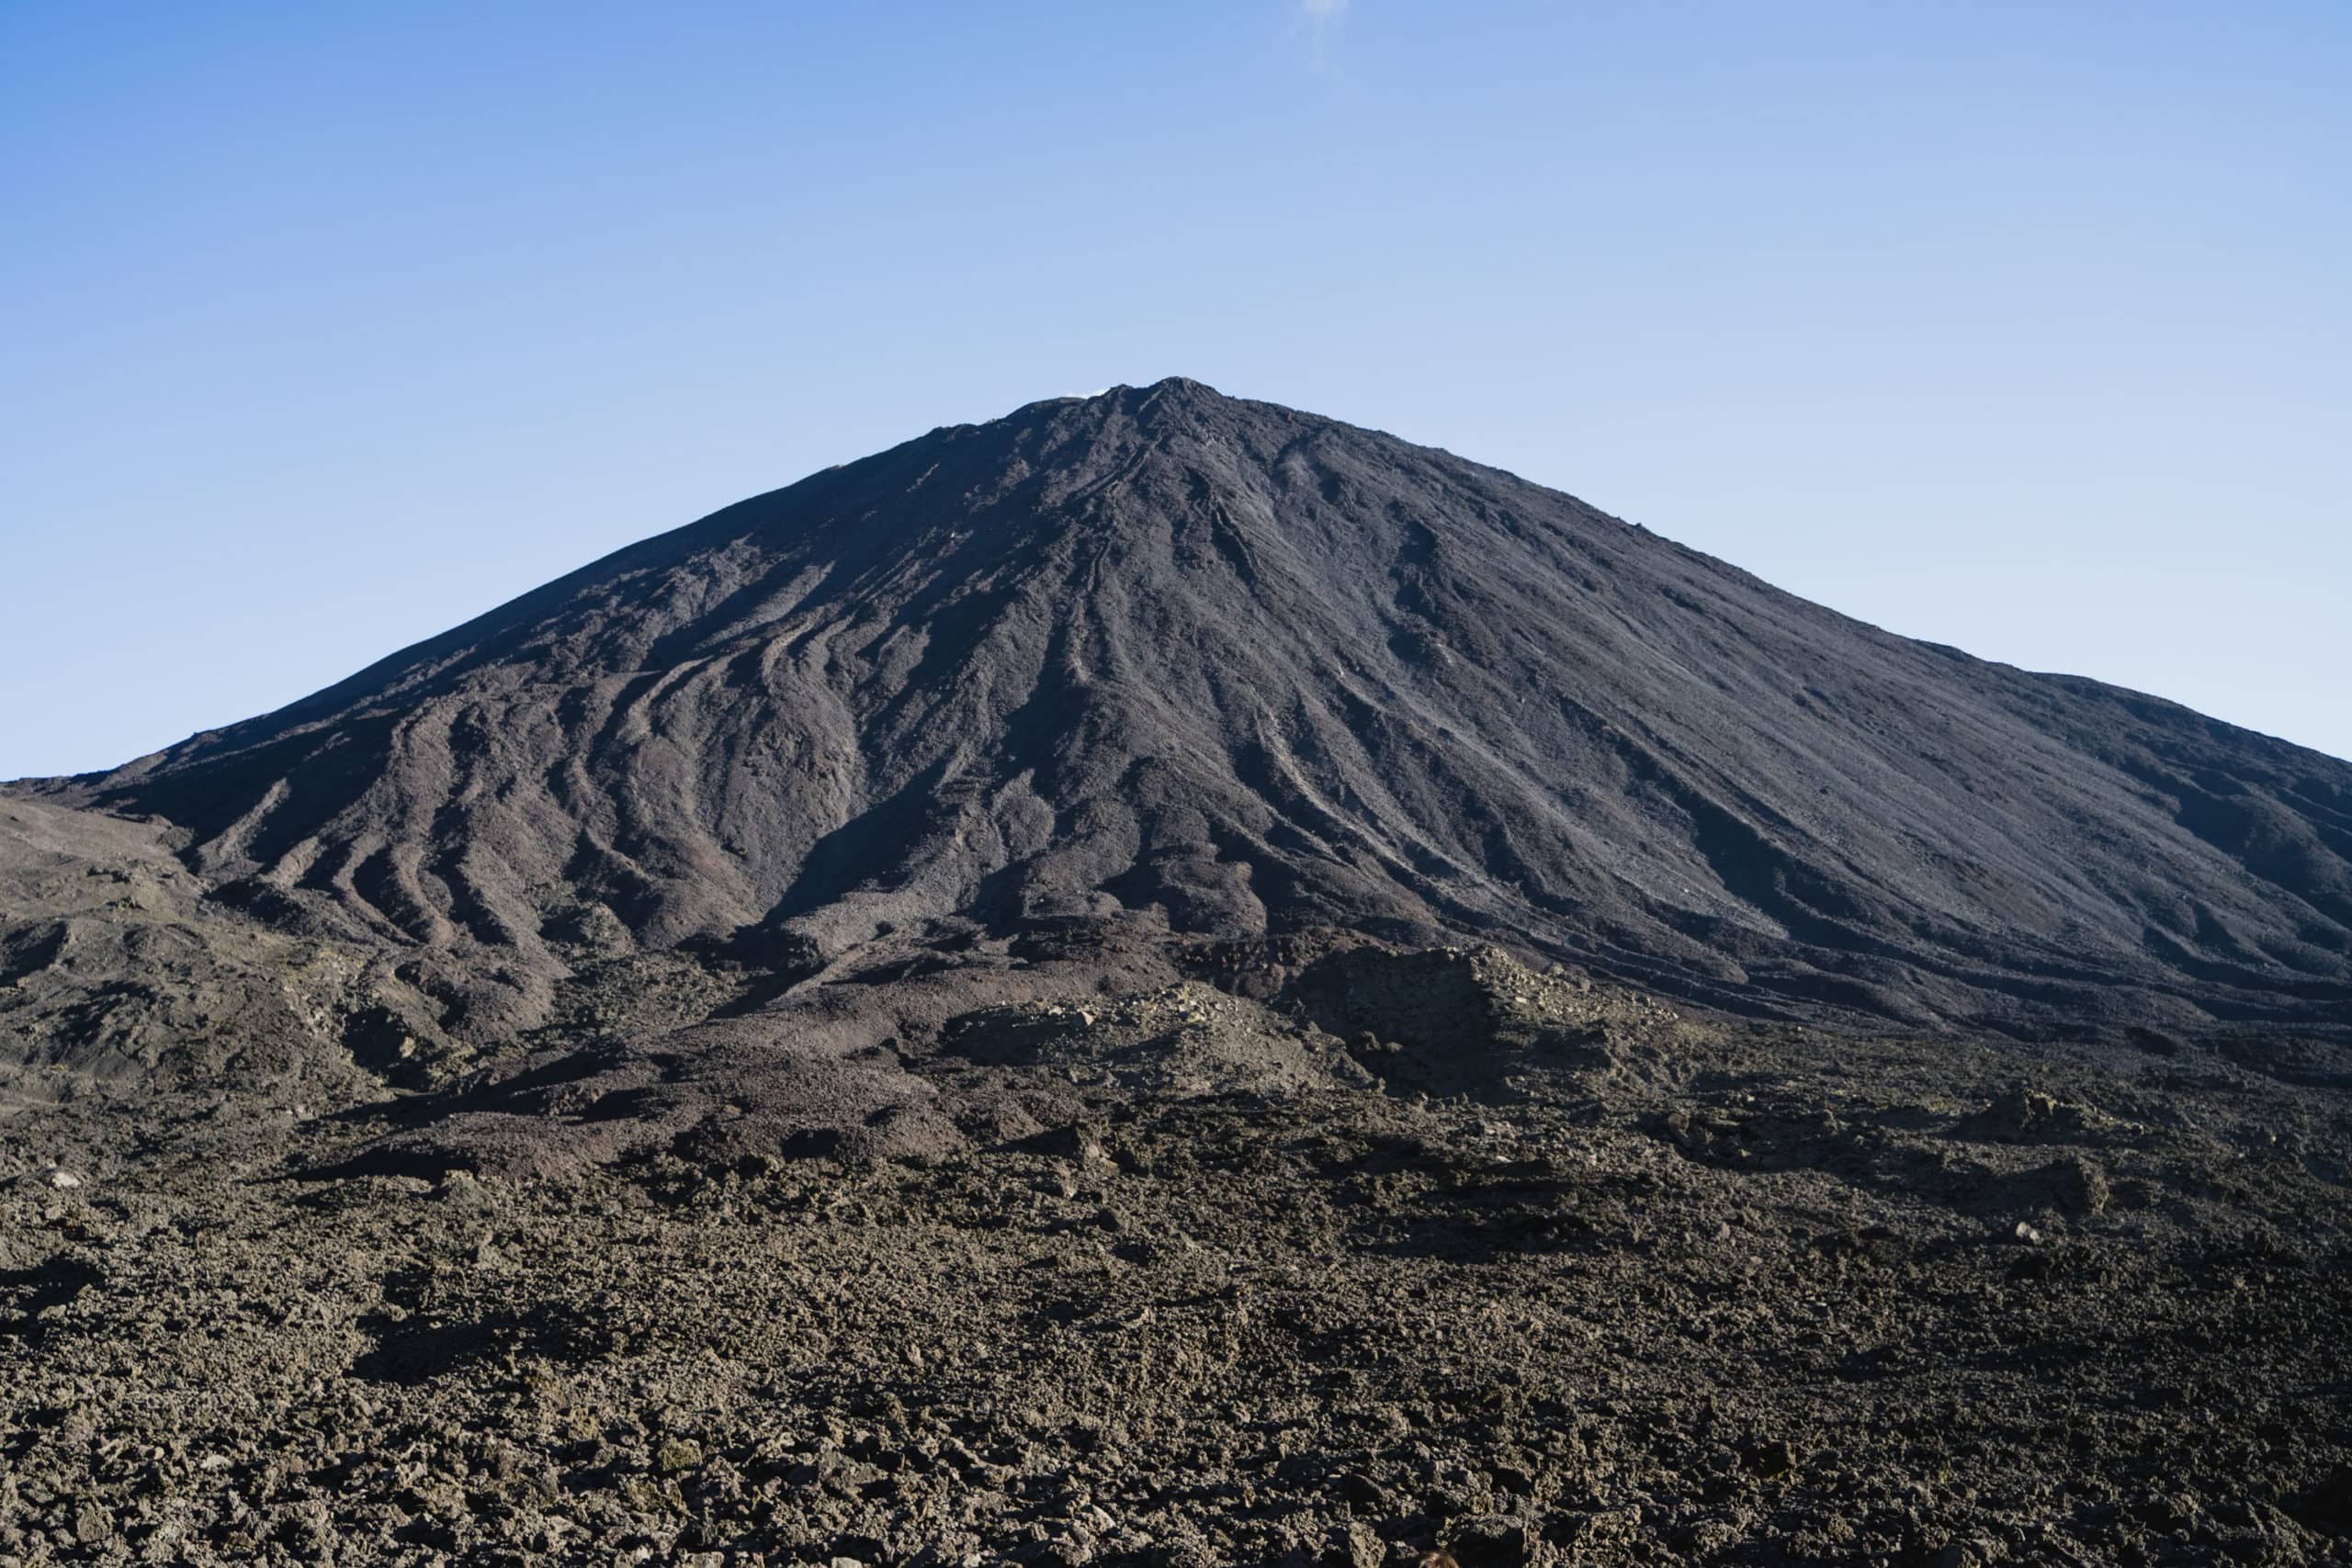 Visiting Volcano Pacaya is one of the best things to do in Guatemala